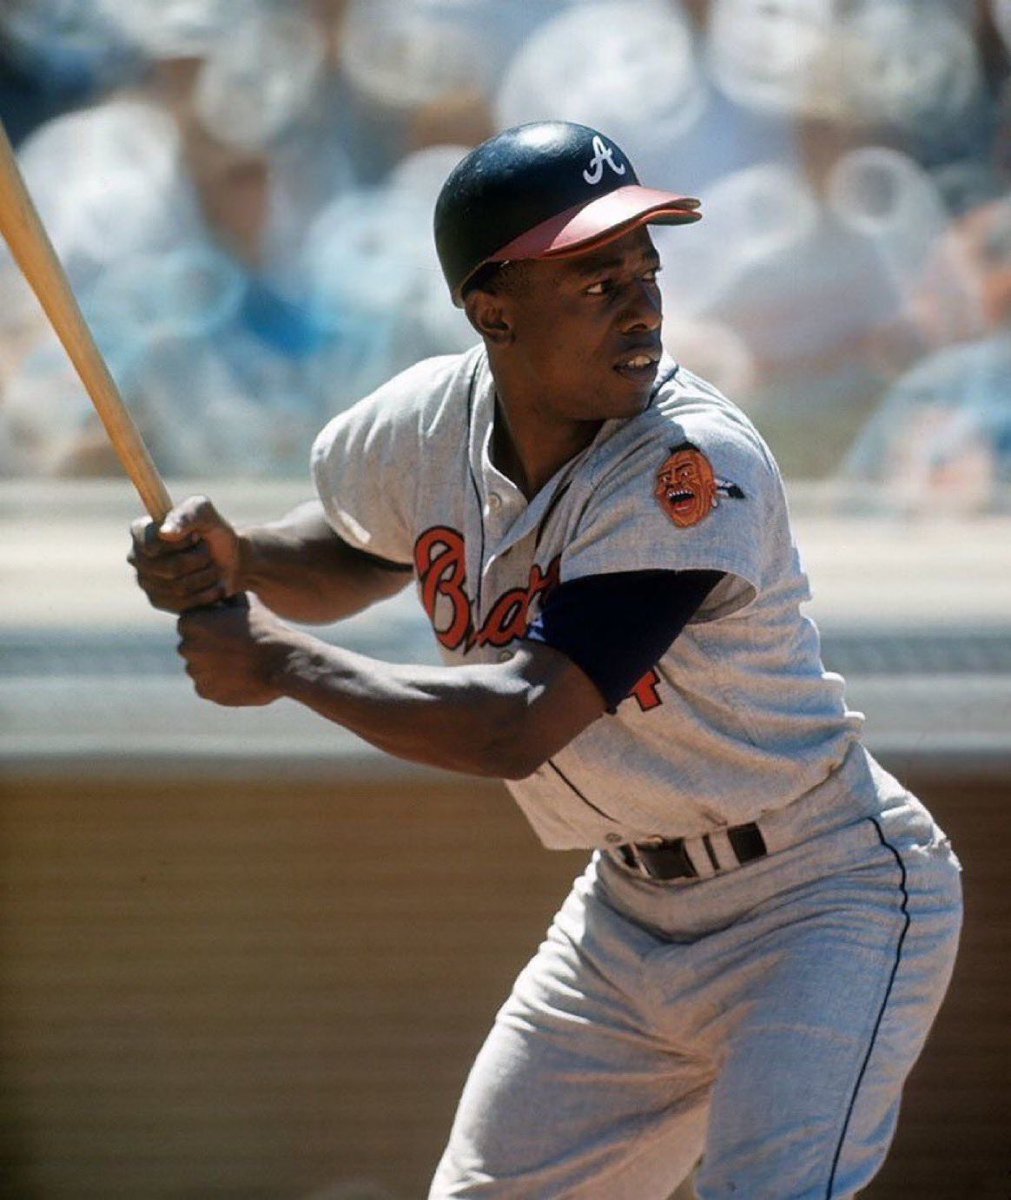 Nine writers didn’t for vote for Hank Aaron to make the Hall of Fame in 1982. I don’t know if any of these assholes are still alive but if any of them happen to see this tweet, fuuuuck you.